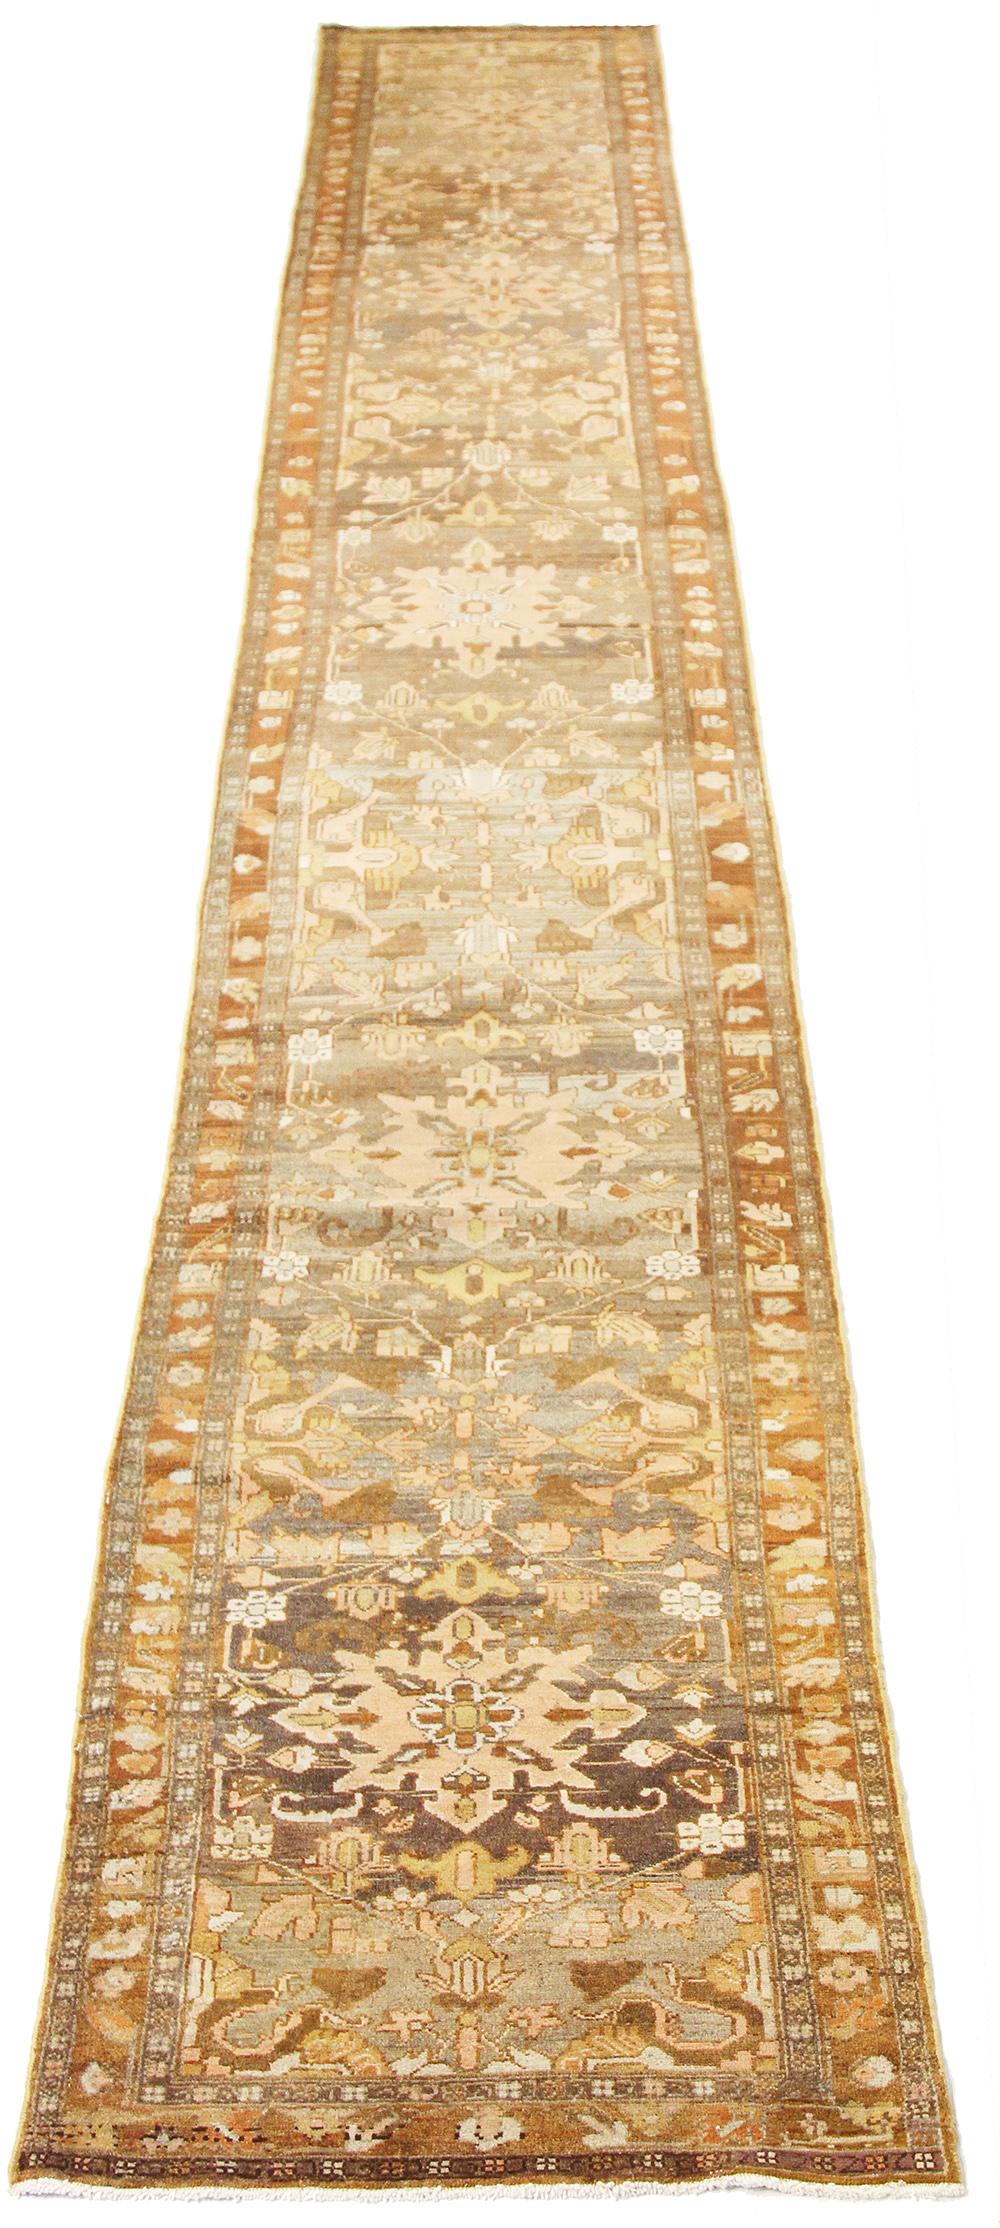 Antique Persian runner rug handwoven from the finest sheep’s wool and colored with all-natural vegetable dyes that are safe for humans and pets. It’s a traditional Mehraban design featuring floral details in pink and brown over a beige field. It’s a